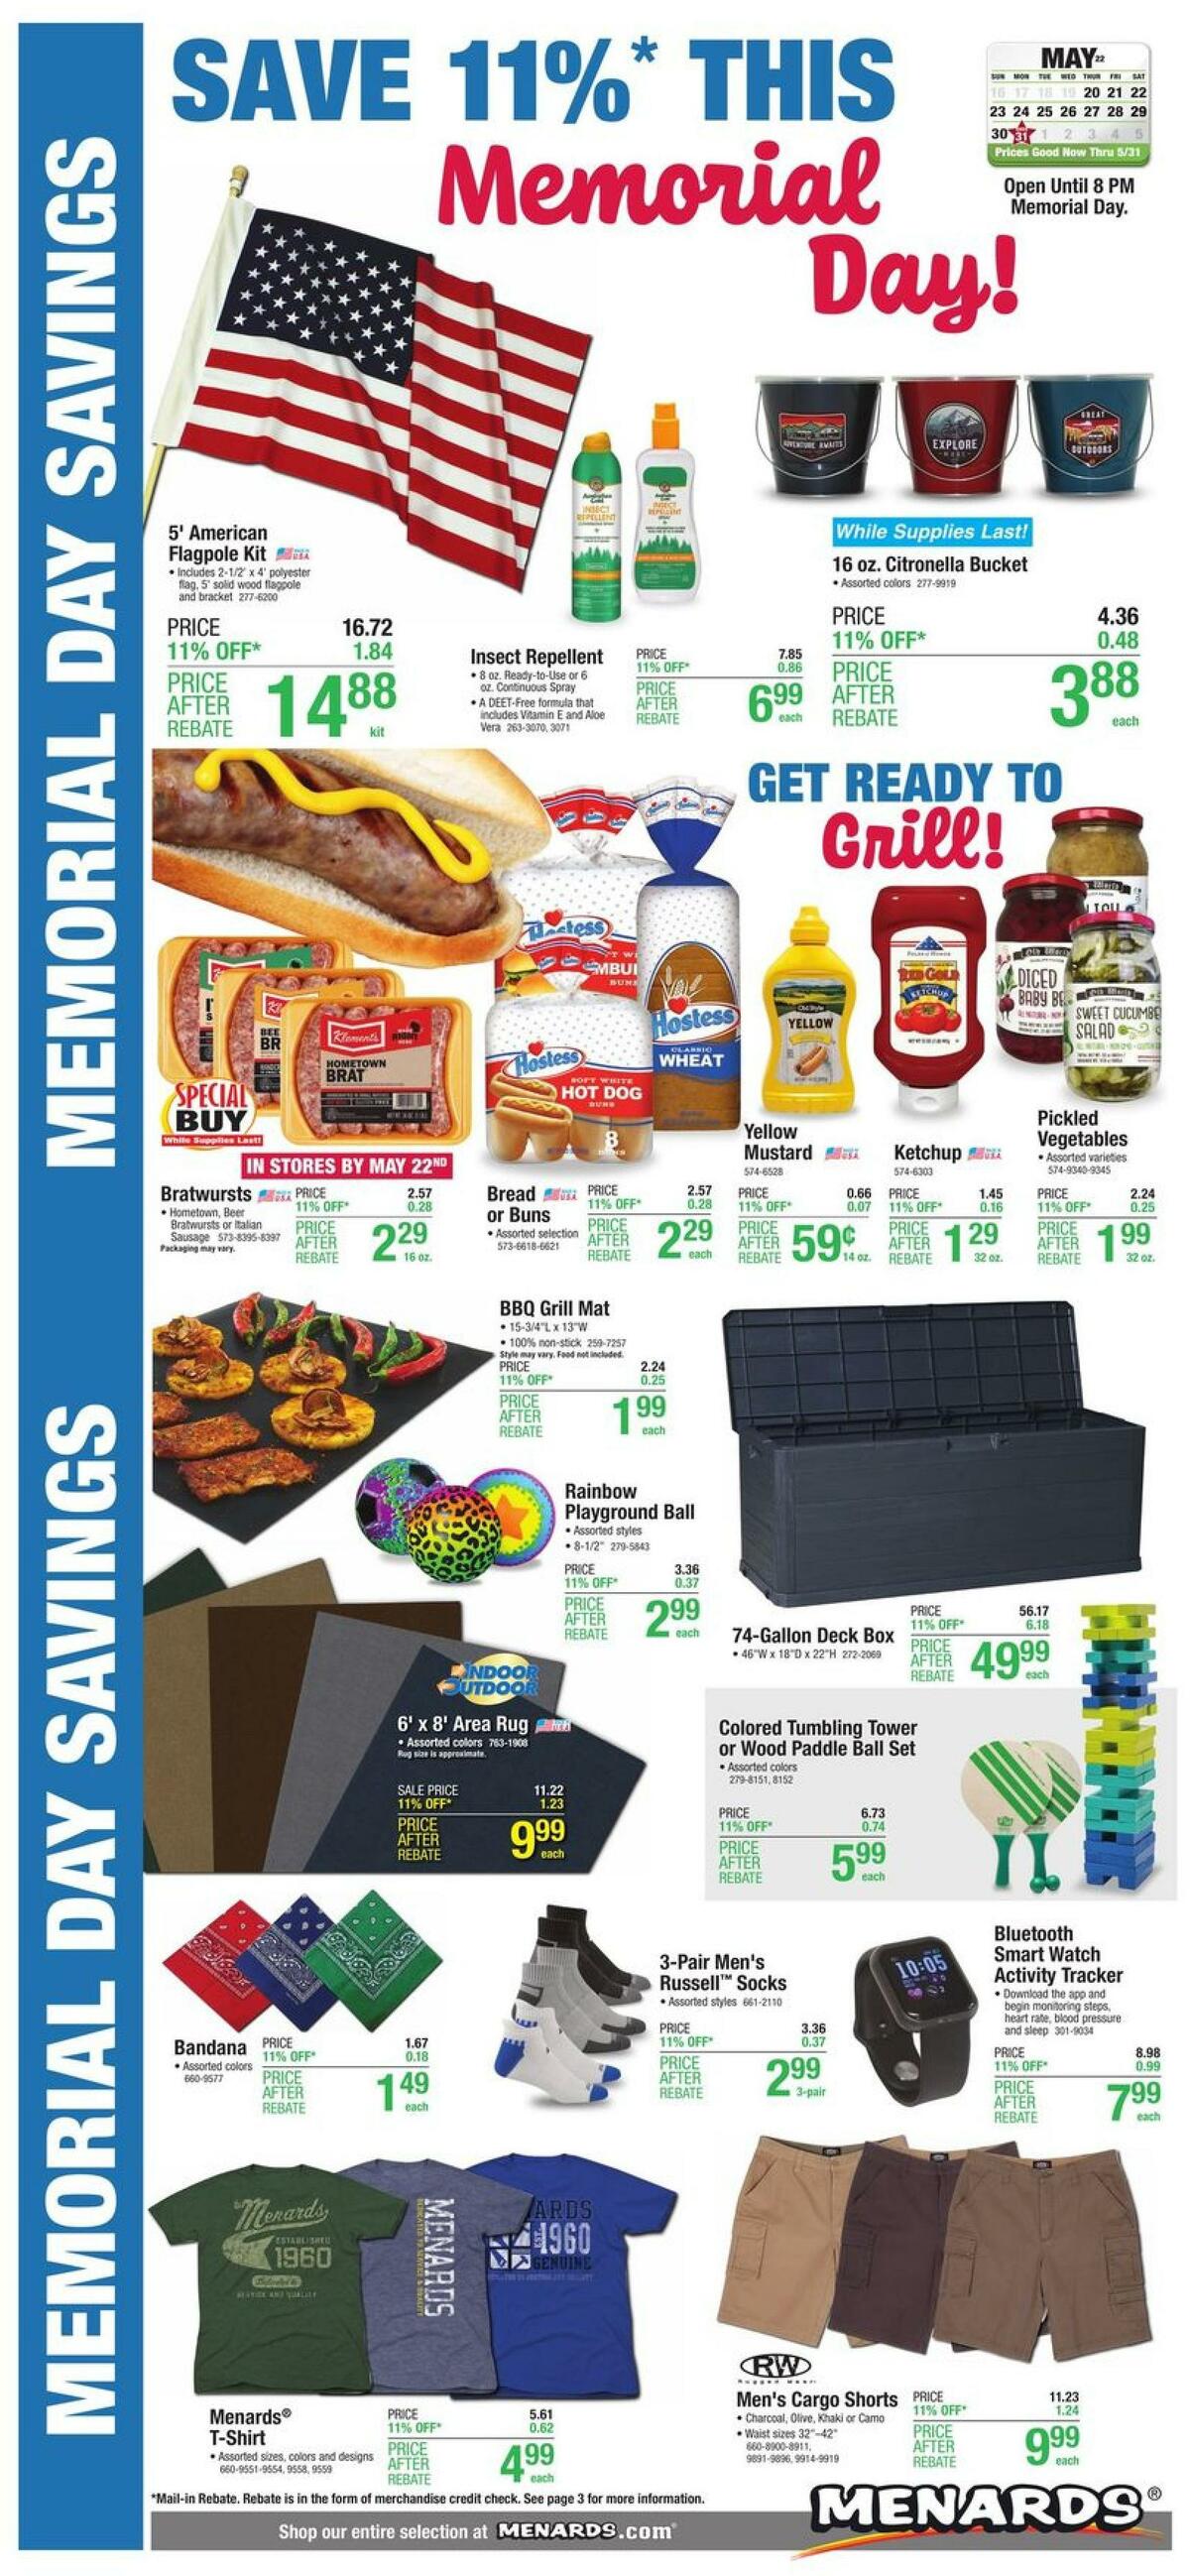 Menards Memorial Day Fun Weekly Ads & Special Buys from May 20